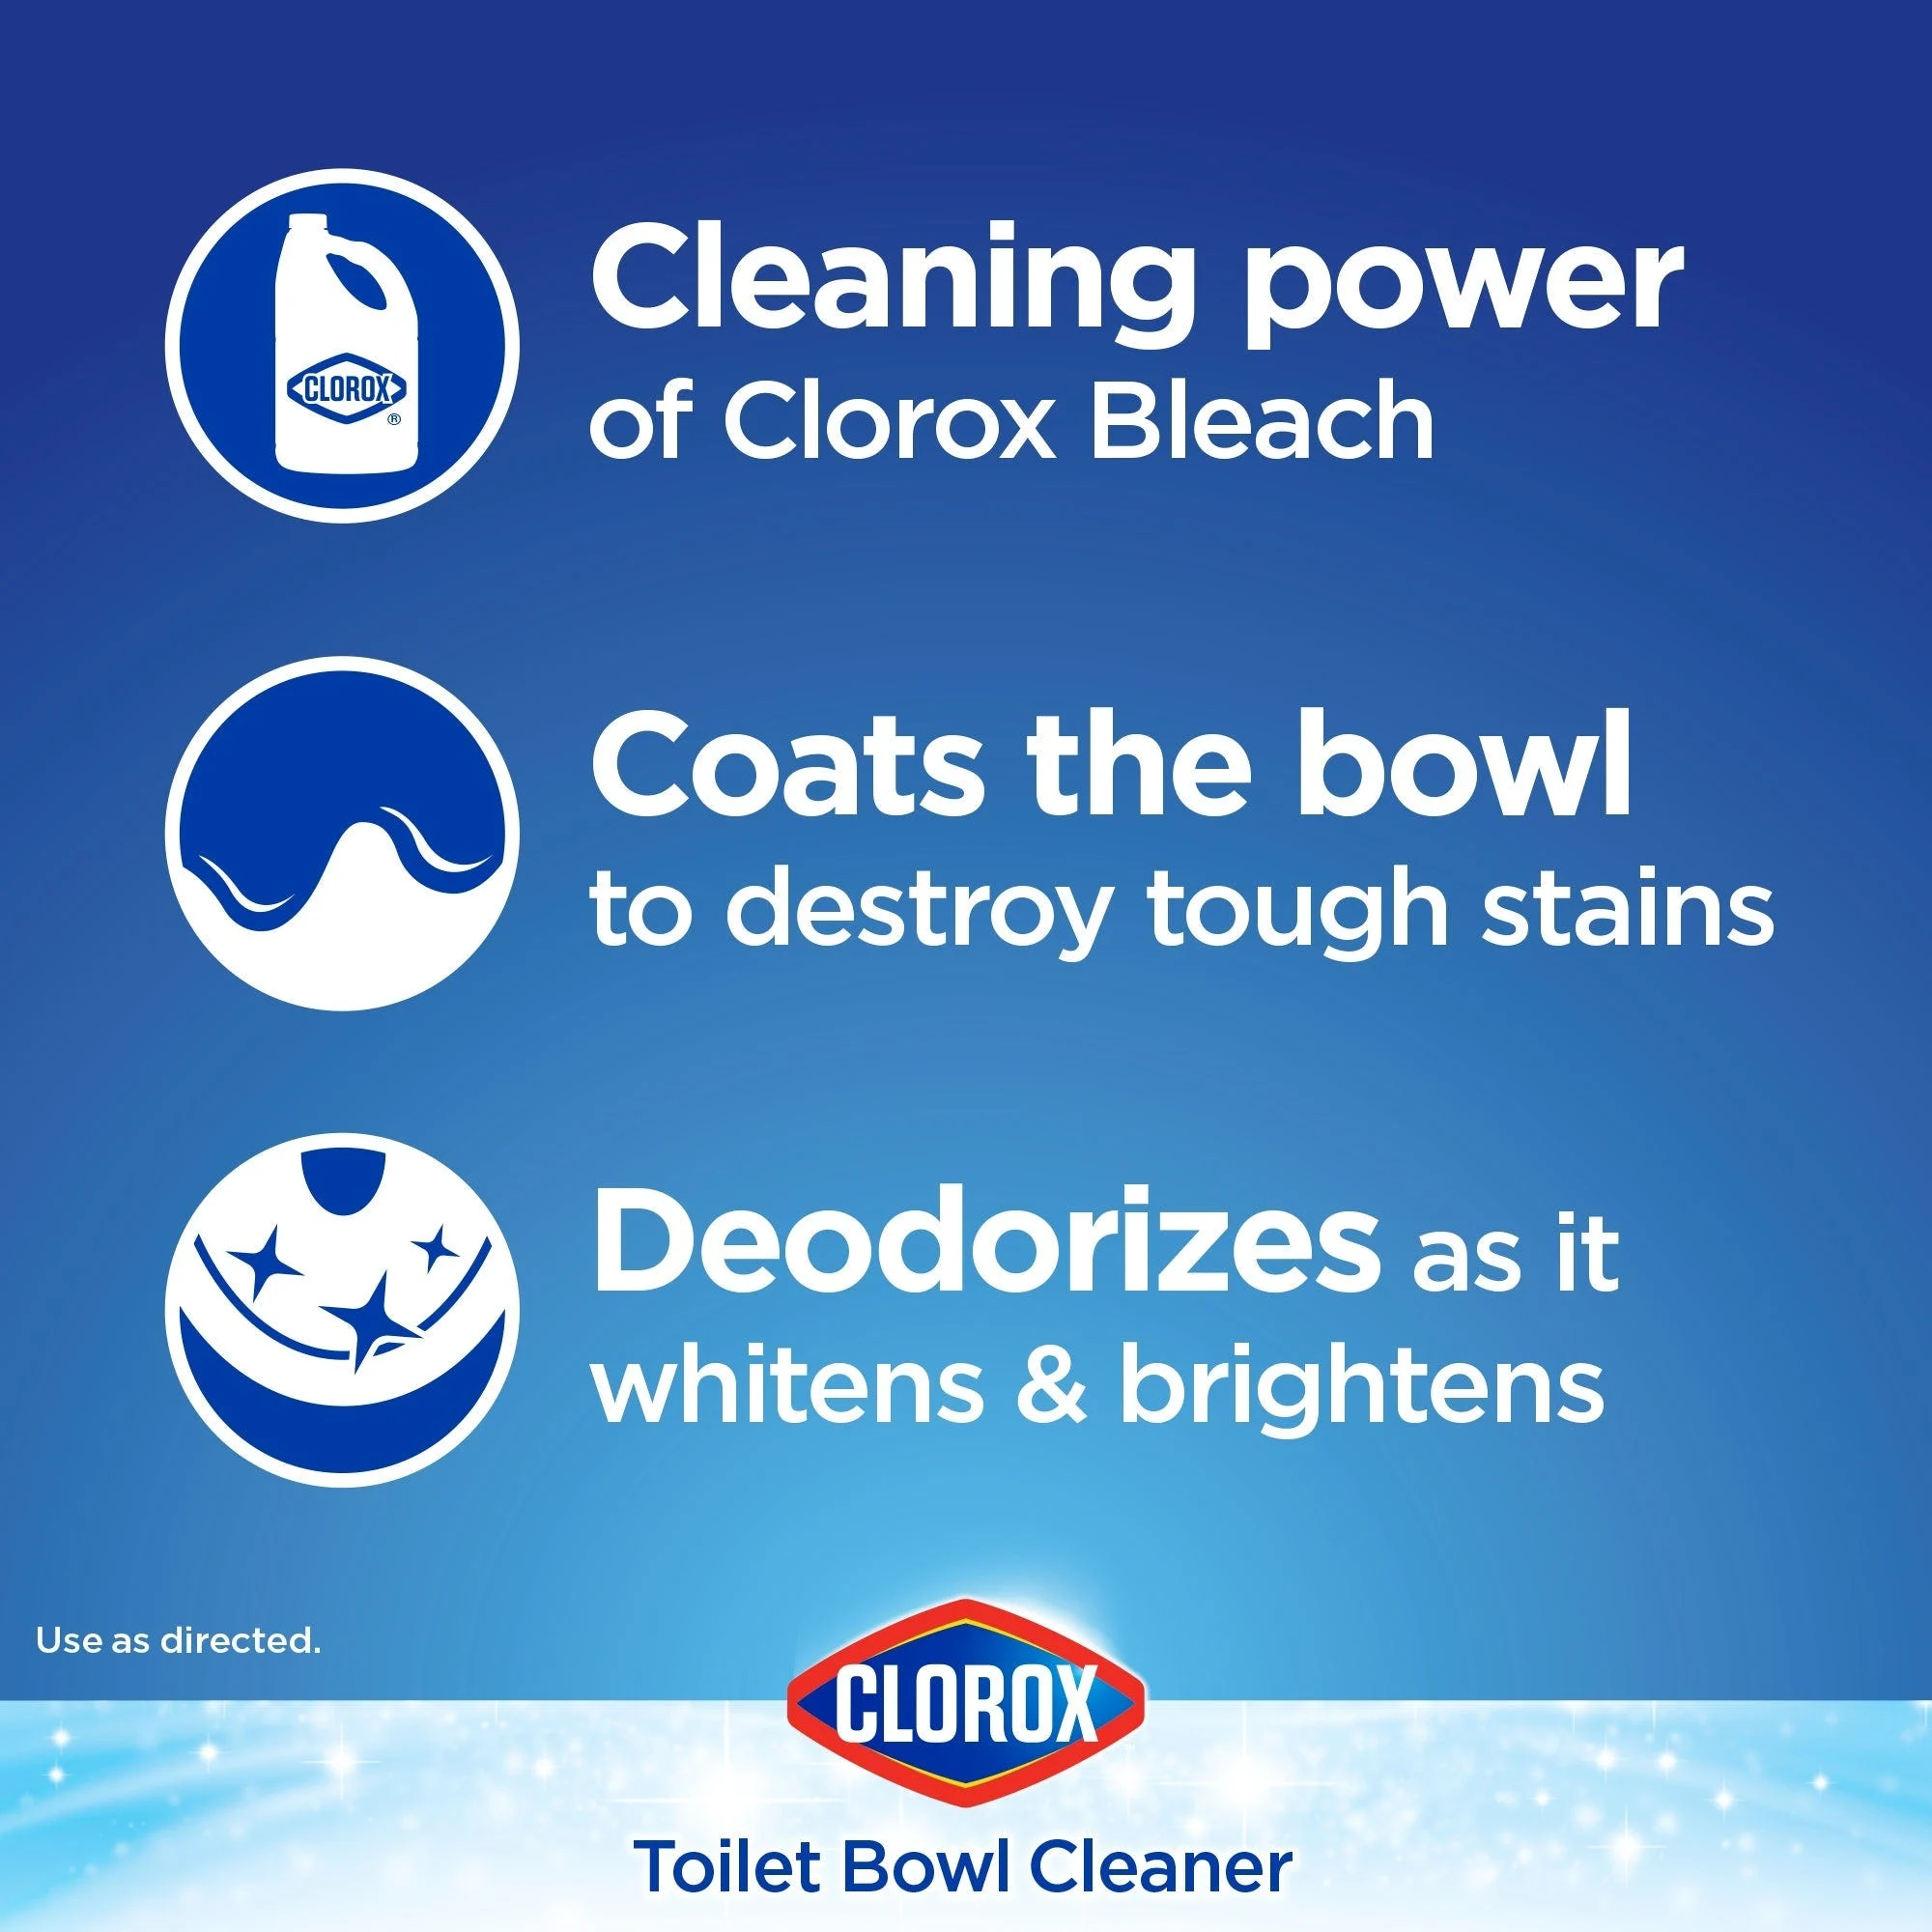 Toilet Bowl Cleaner – with Bleach | Fresh Breeze